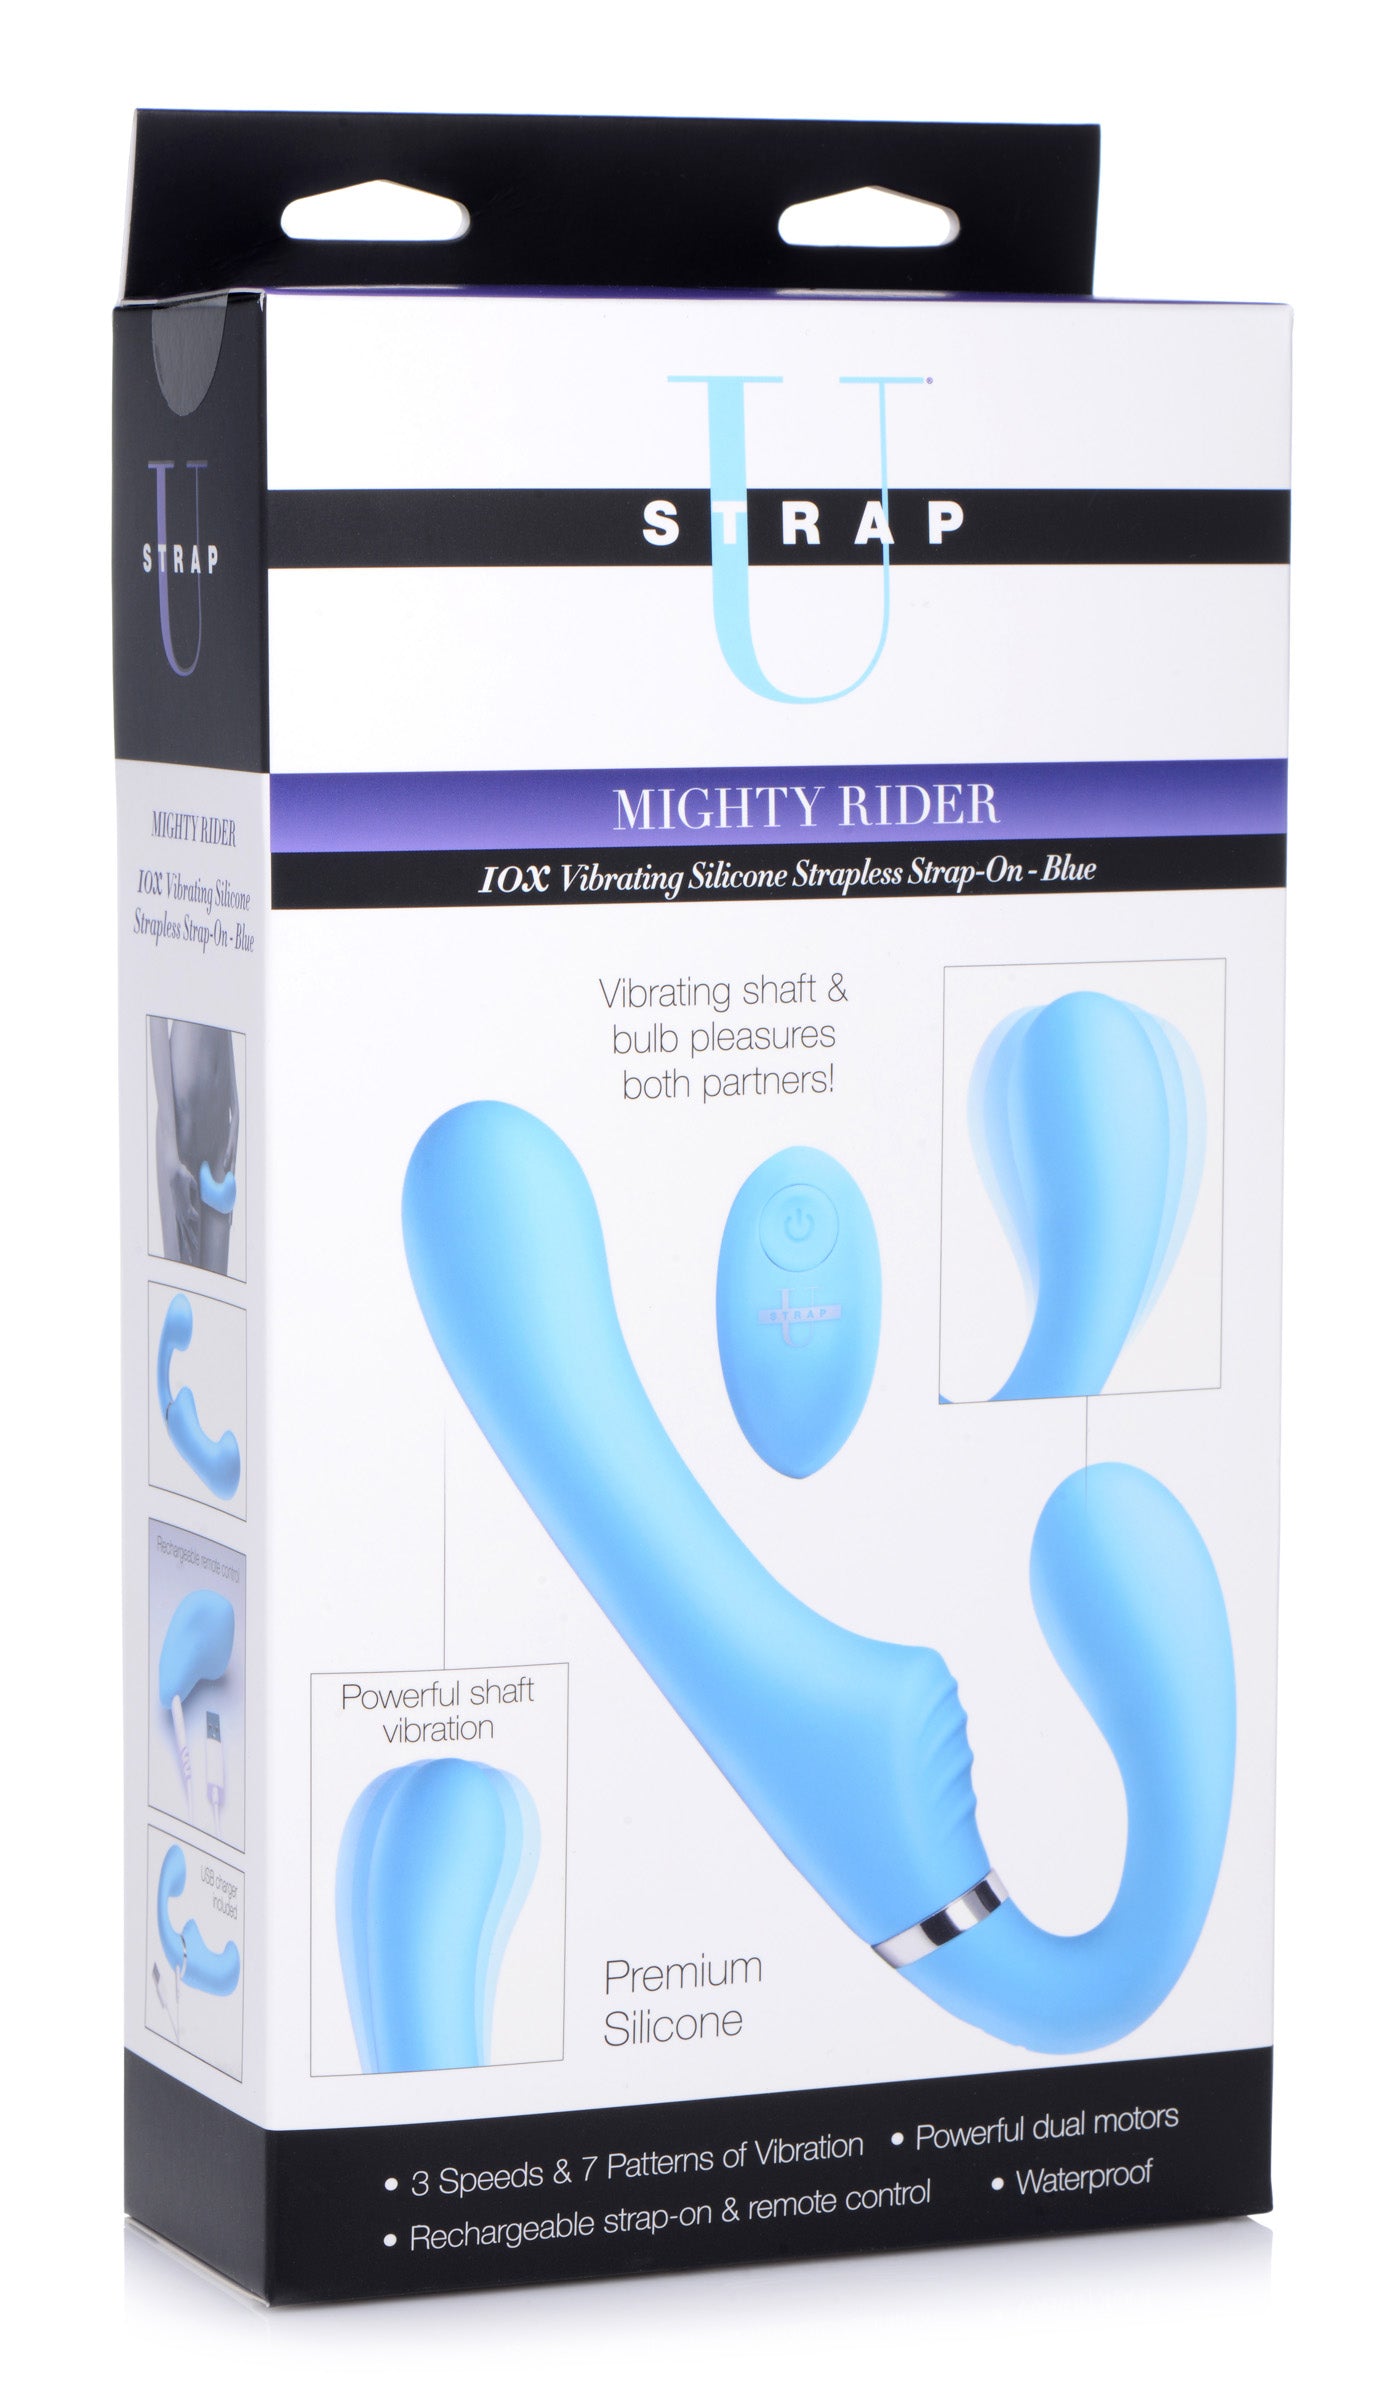 10x Mighty Rider Vibrating Strapless Strap-on - Blue SU-AG557-BLUE